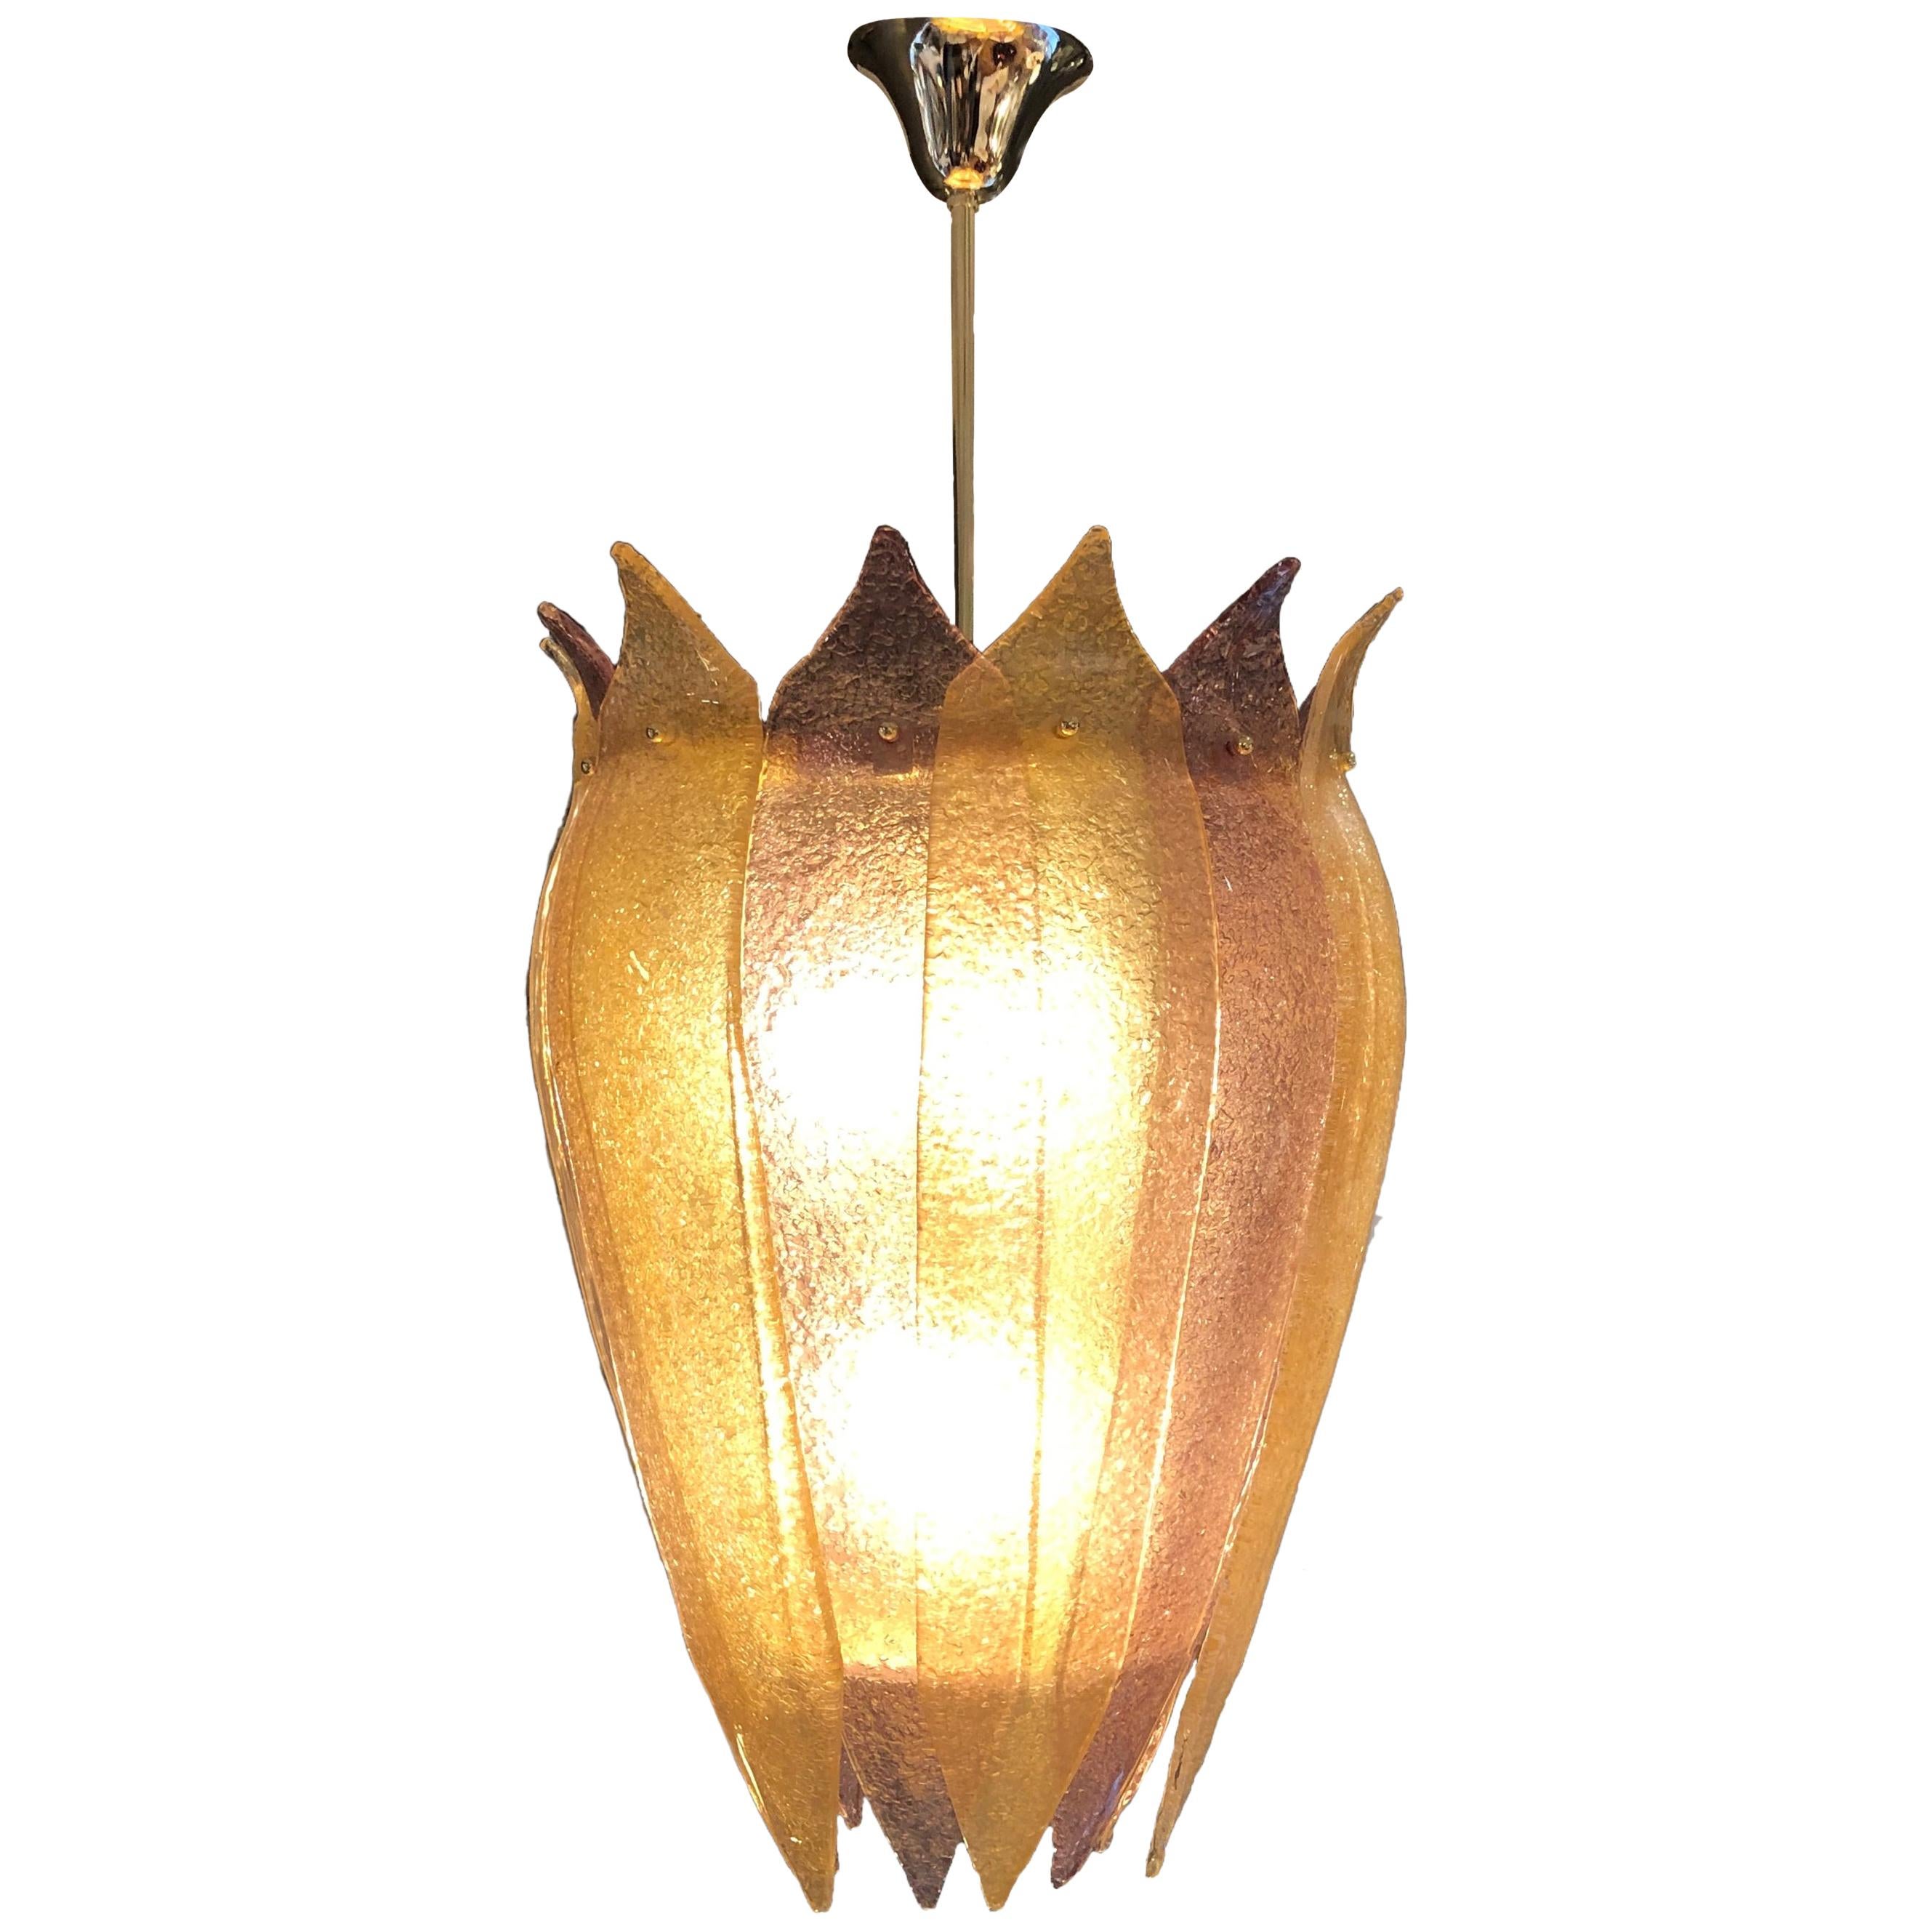 Murano Glass Chandelier at cost price. For Sale